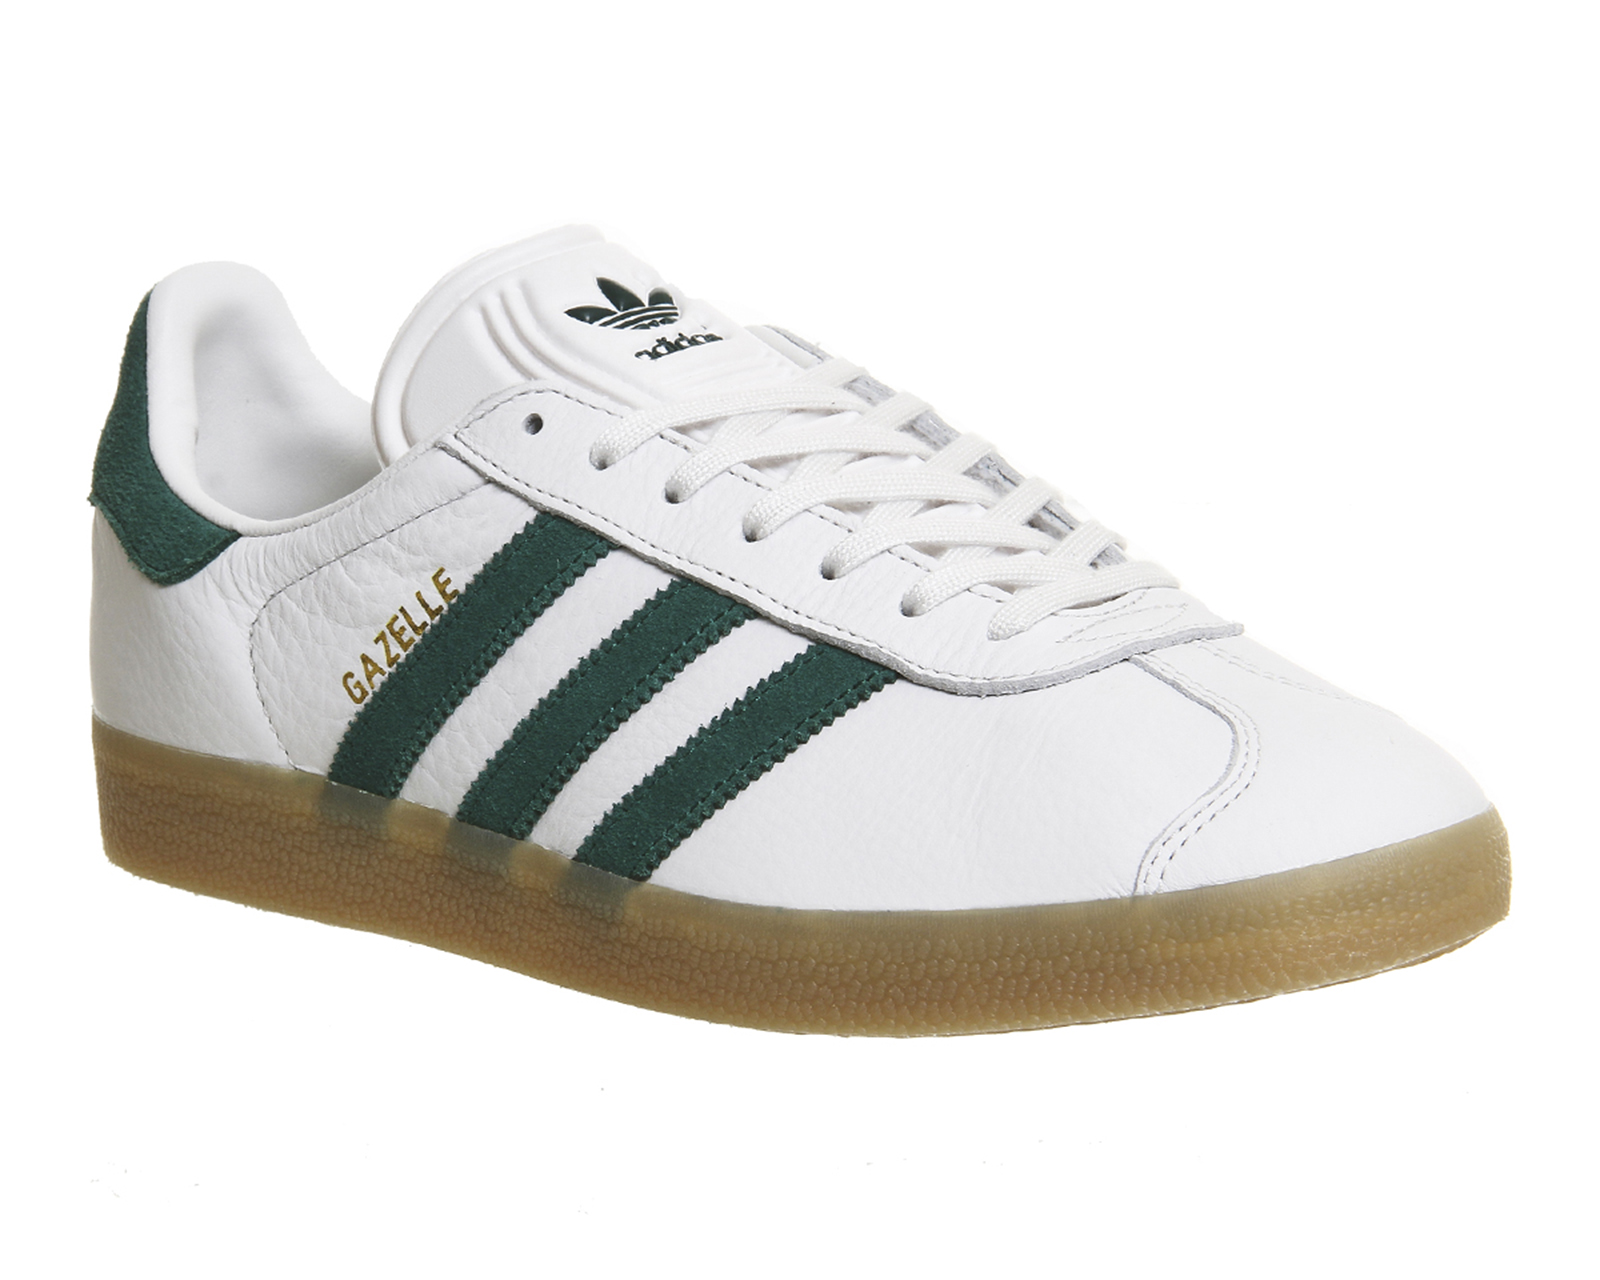 adidas originals gazelle vintage green and white trainers